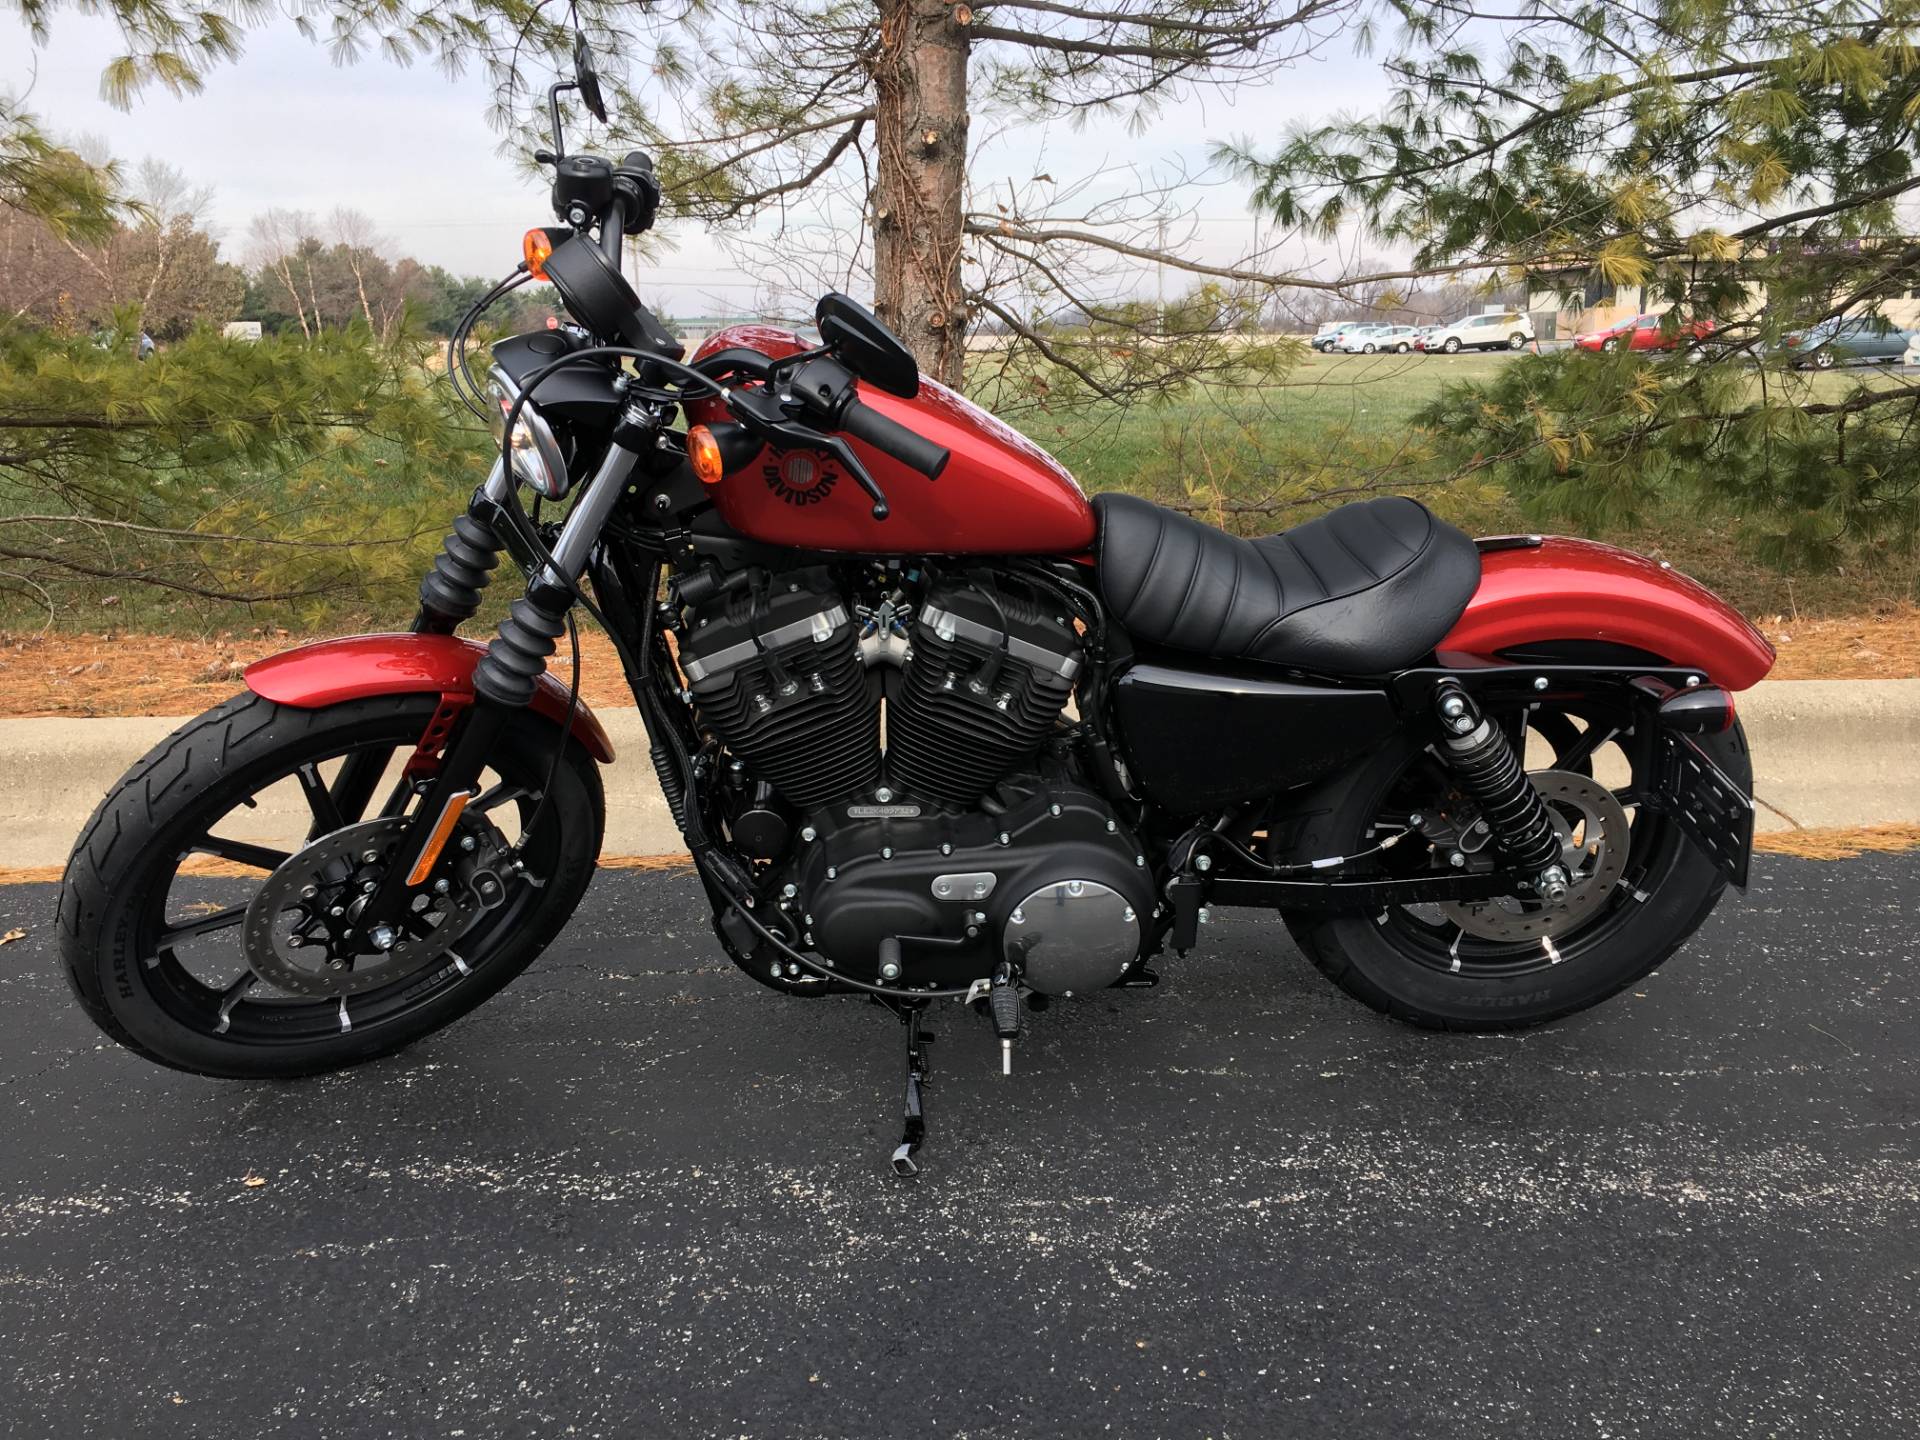 2019 Harley-davidson Iron 883 In Forsyth, Illinois - Harley Davidson 883 2019 Red , HD Wallpaper & Backgrounds